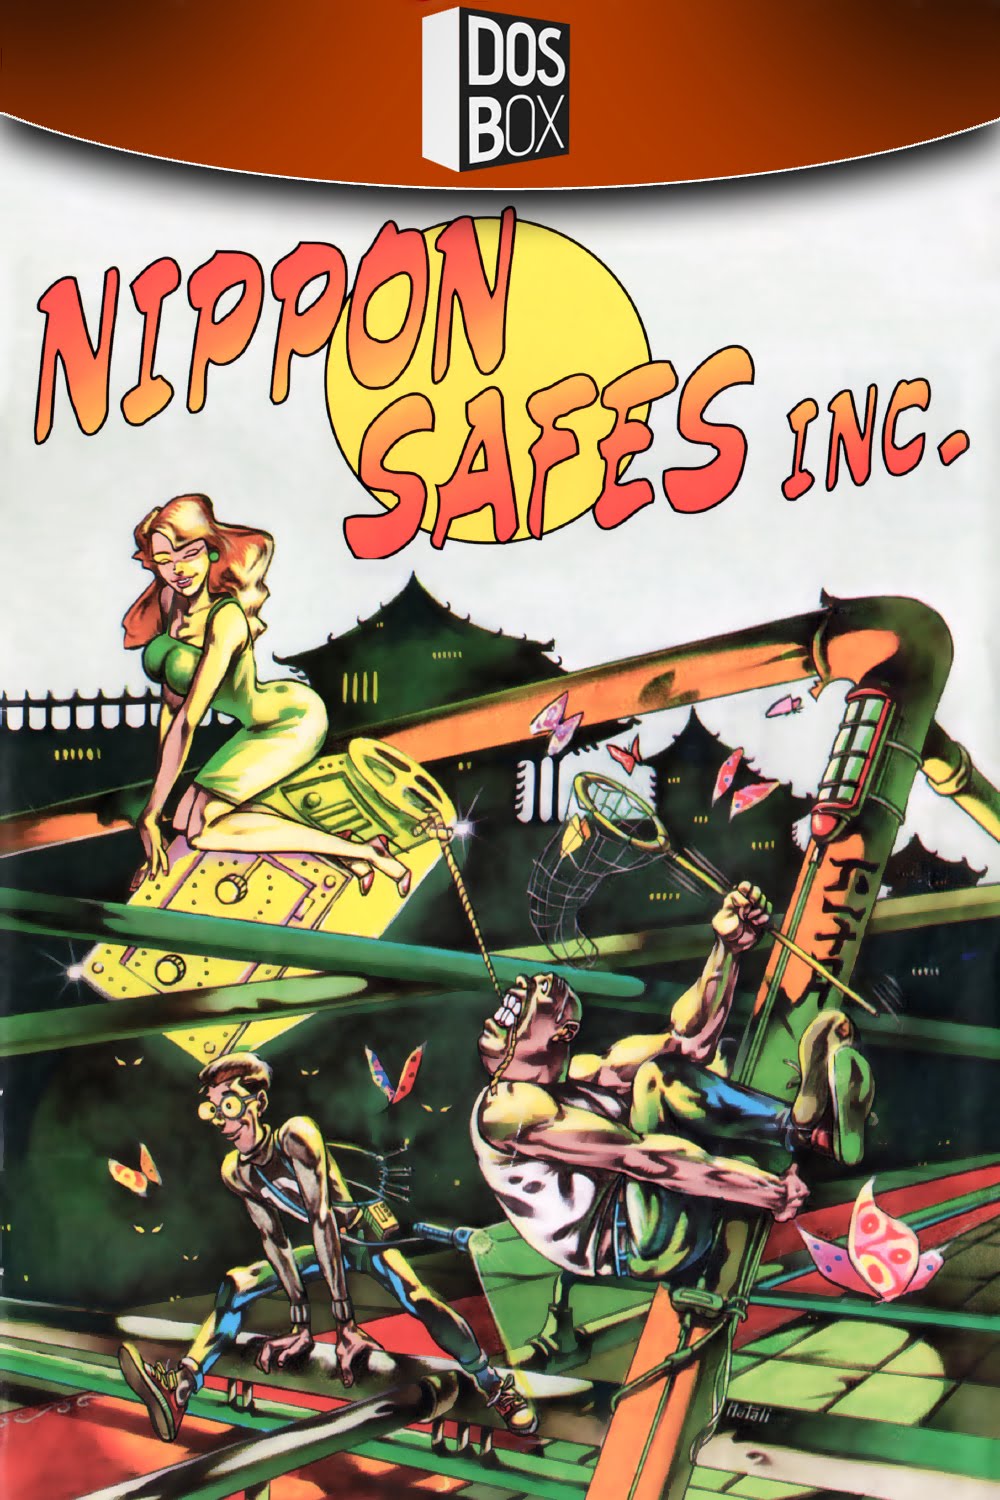 The Collection Chamber: NIPPON SAFES, INC